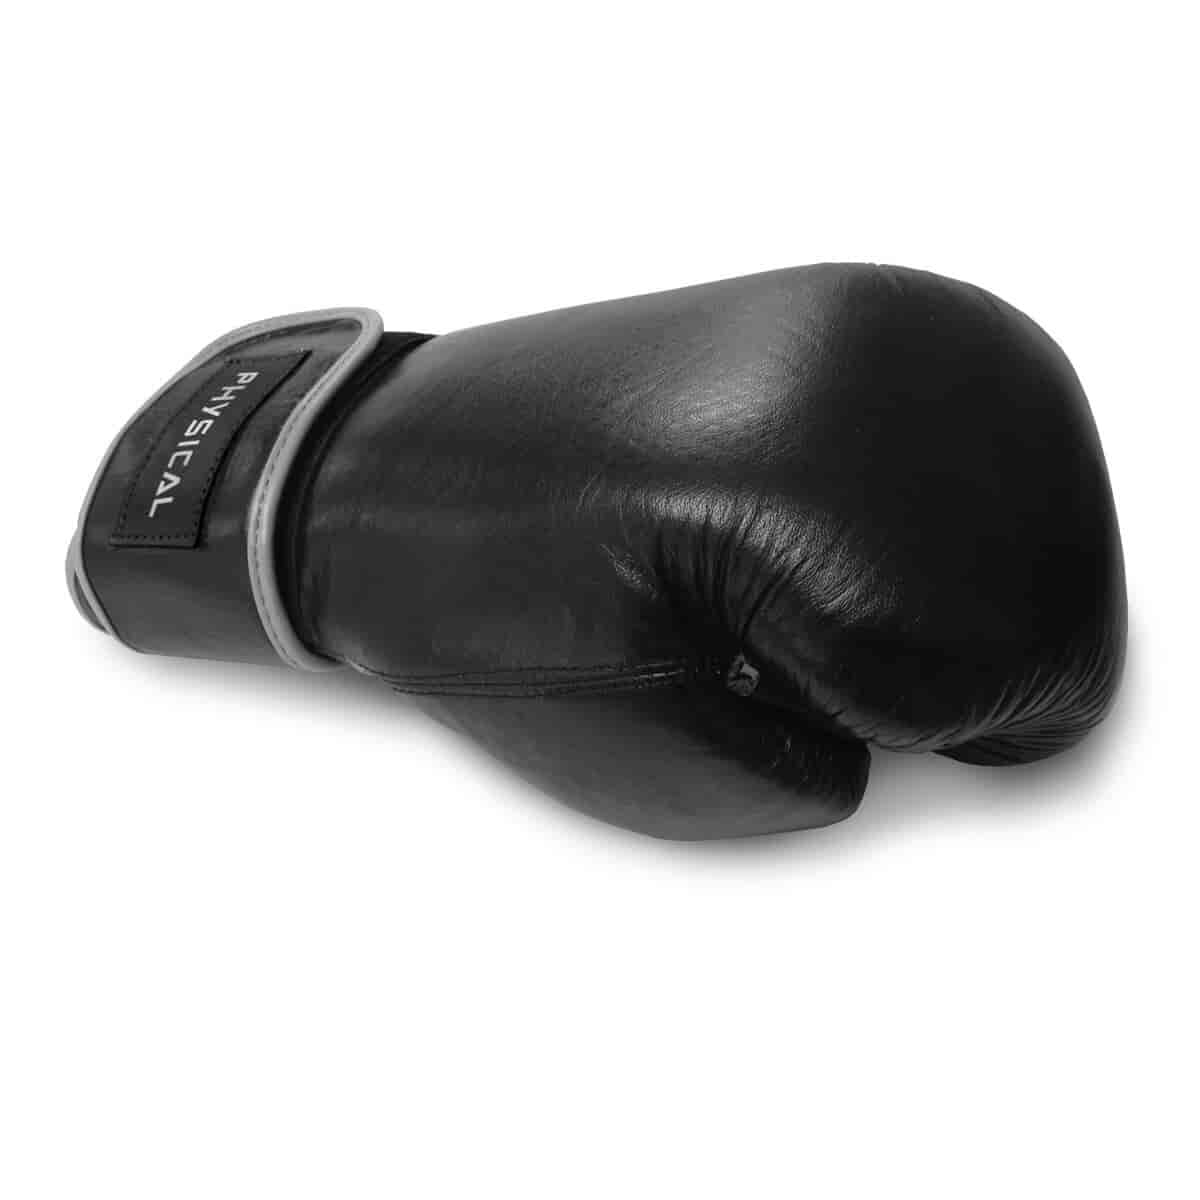  Skip to the beginning of the images gallery      Home     Combat and Boxing Equipment     Boxing Gloves & Mitts     Pro Leather Boxing Gloves  Pro Leather Boxing Gloves